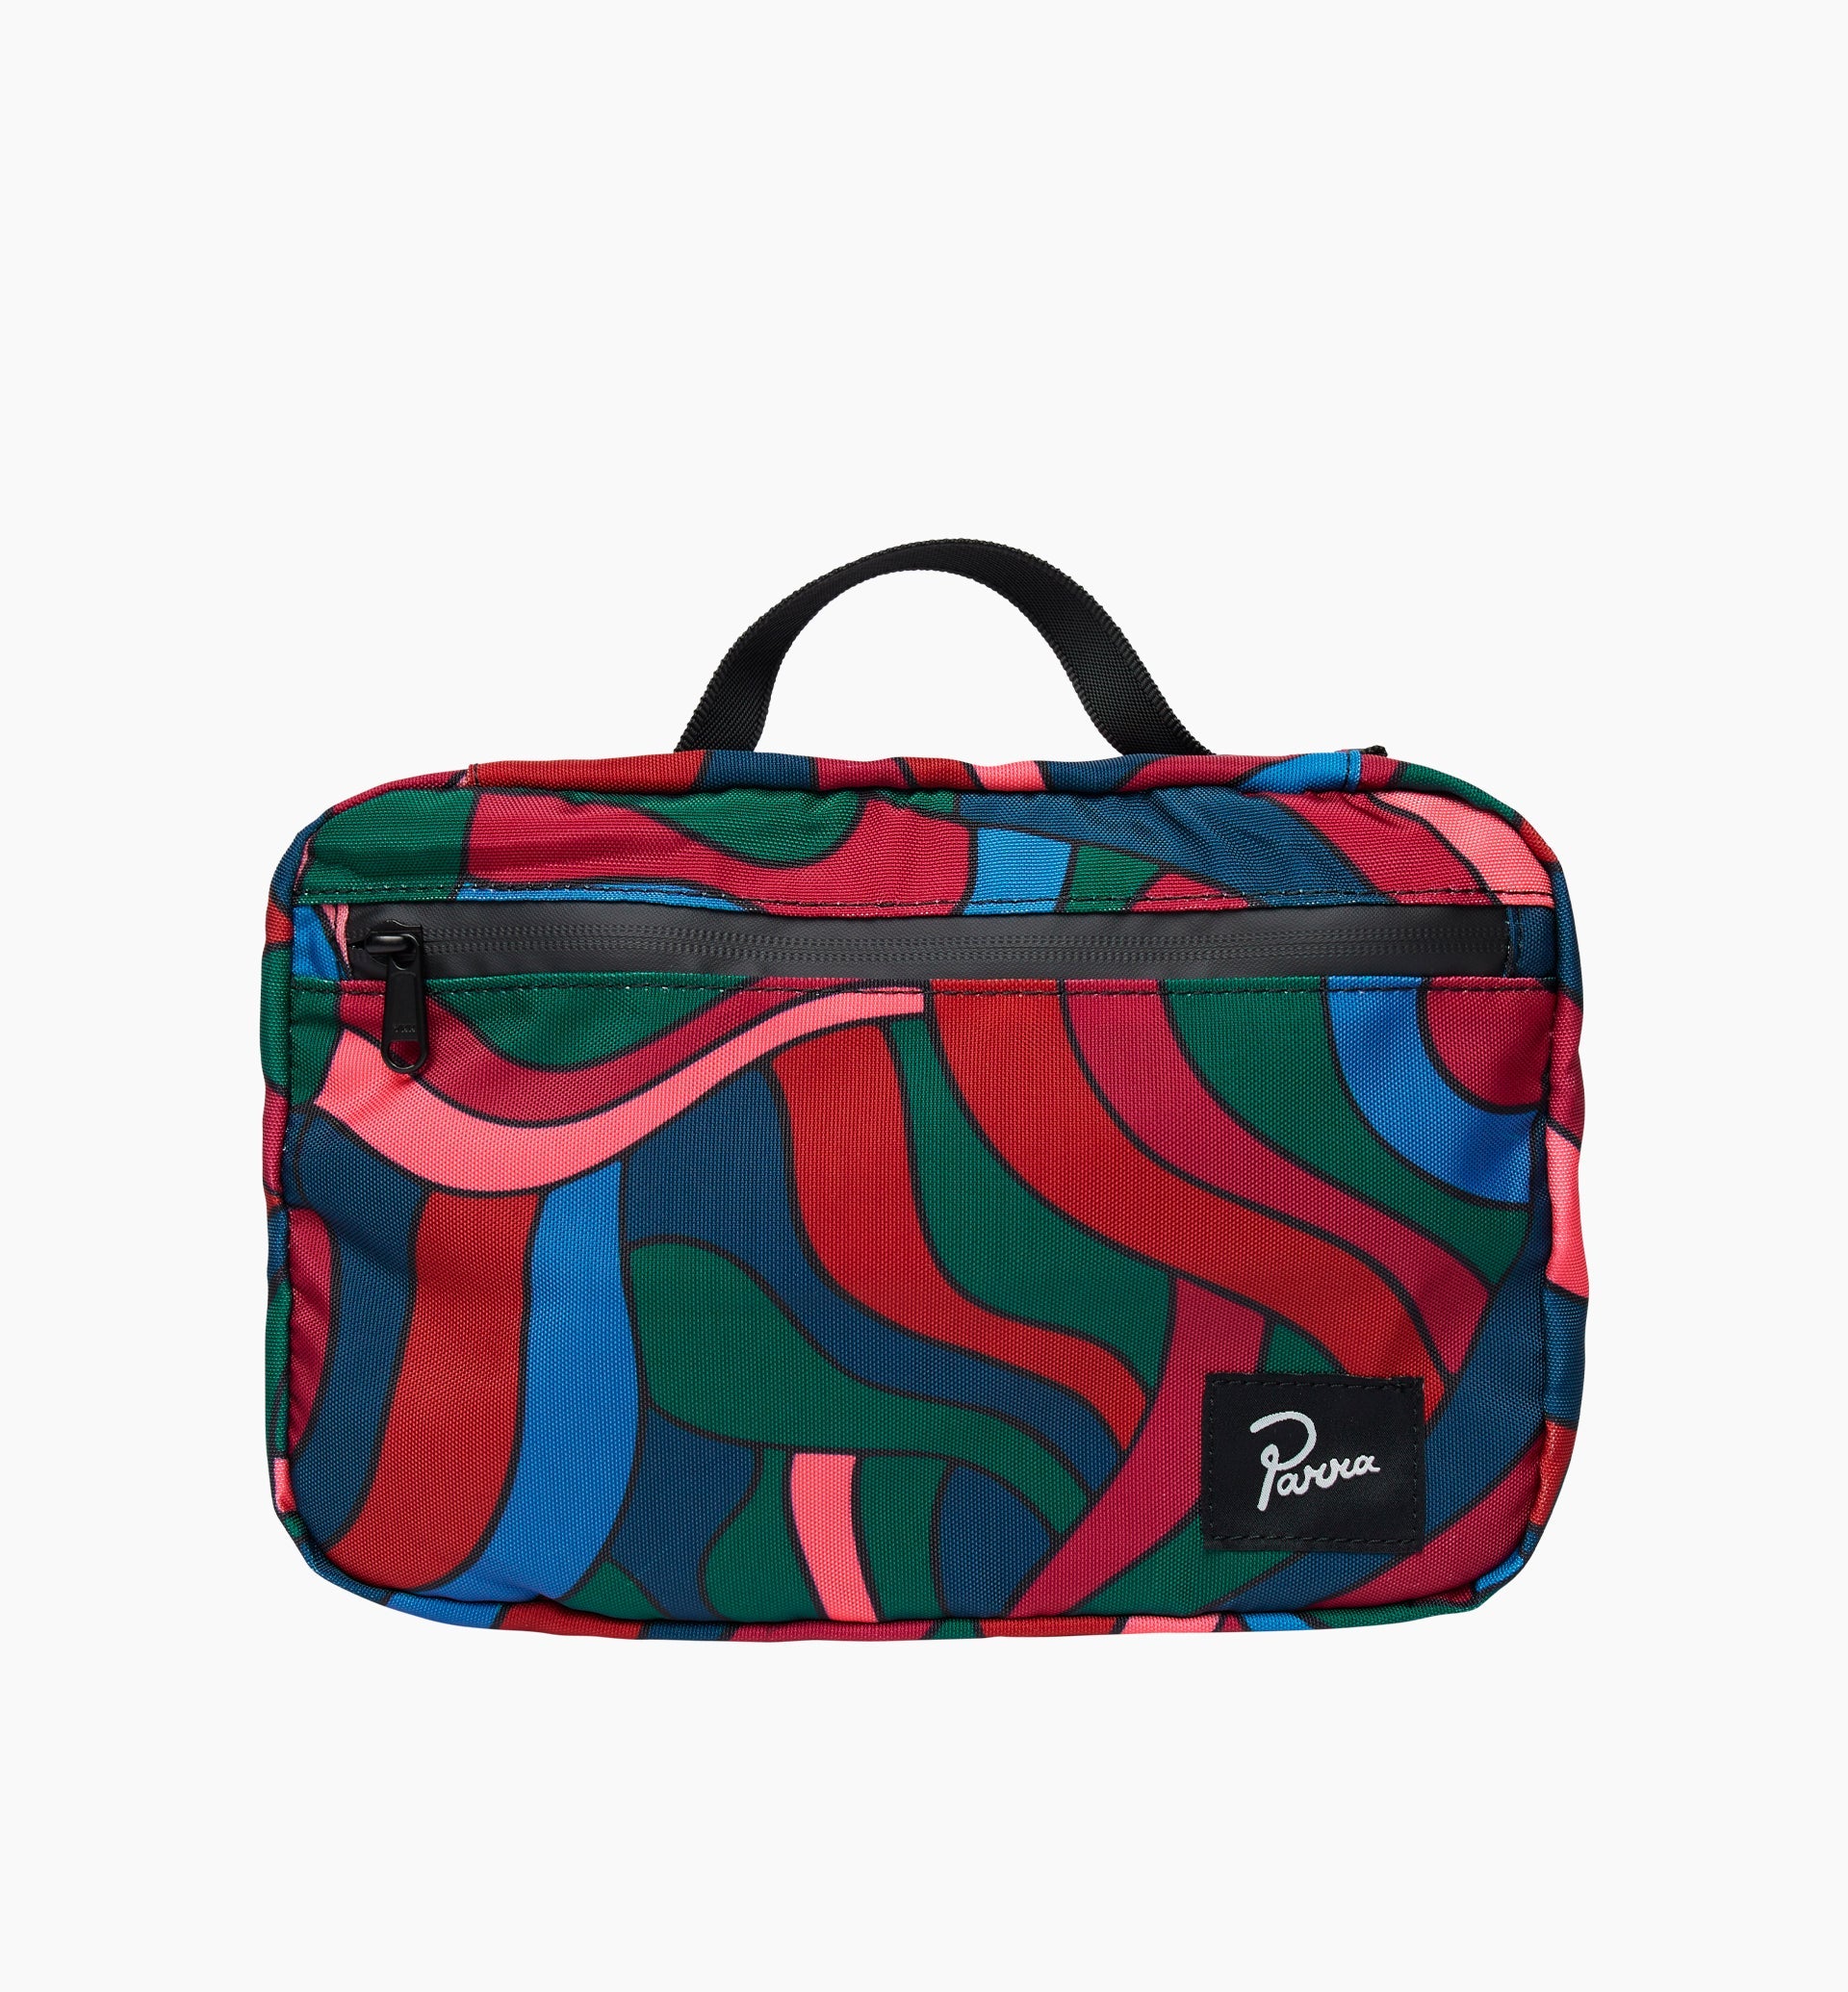 Parra - distorted waves toiletry bag